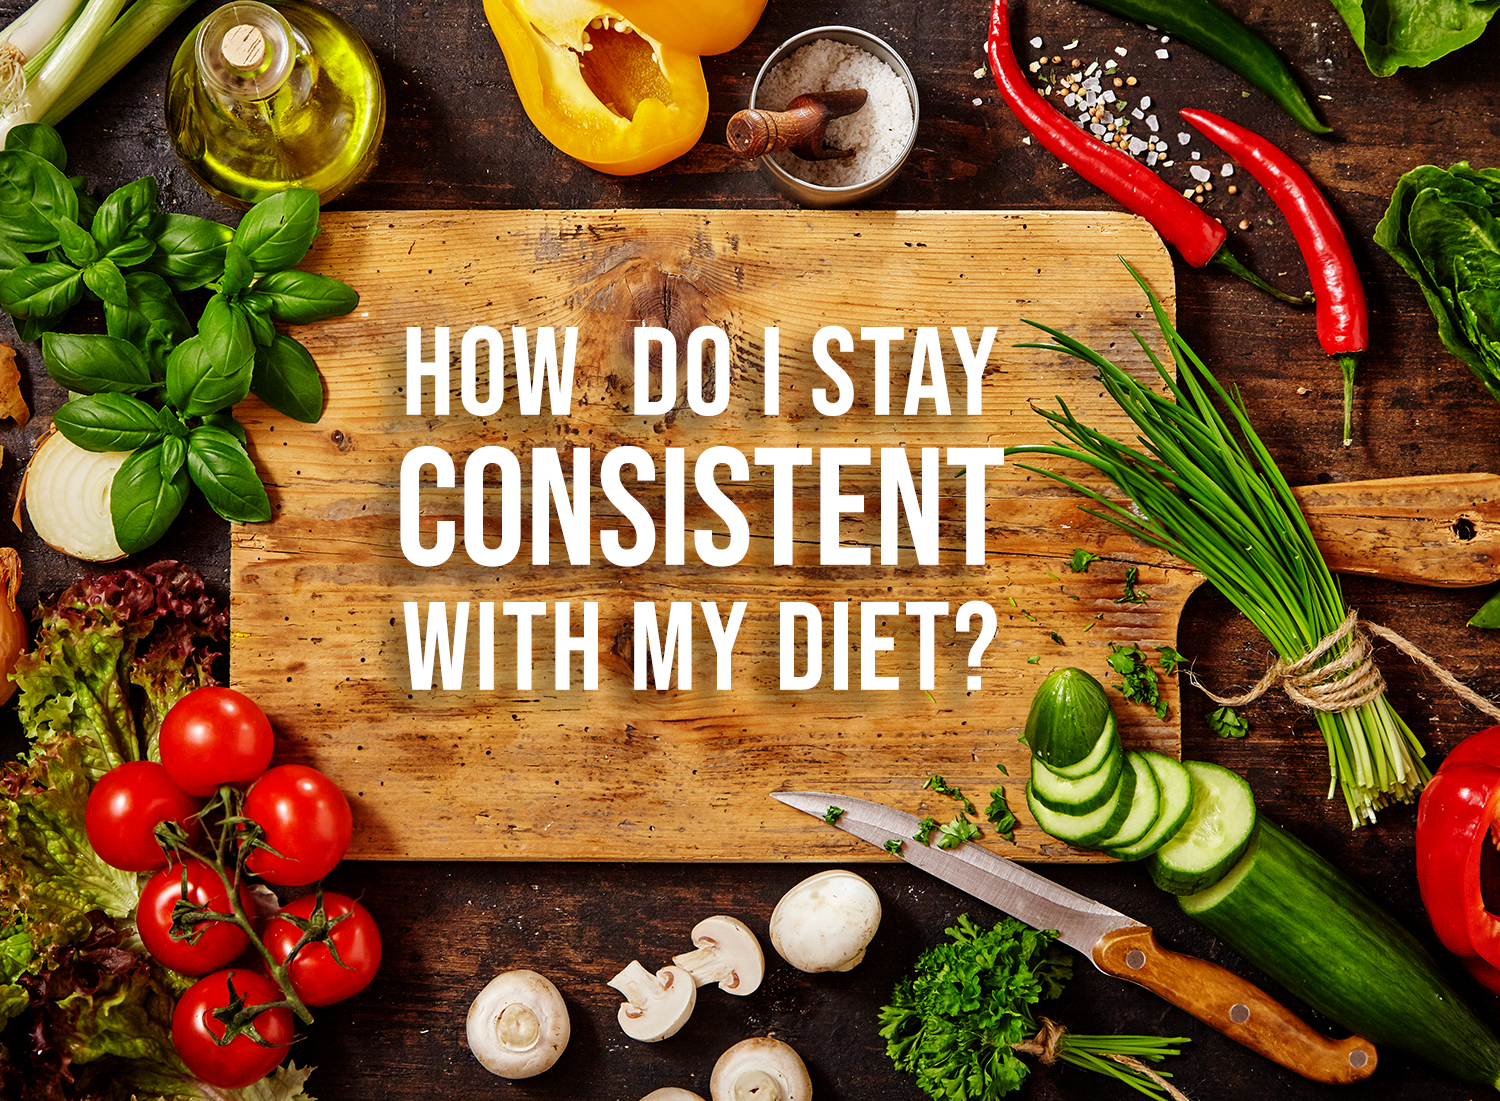 How Can I Stay Consistent with my Diet?